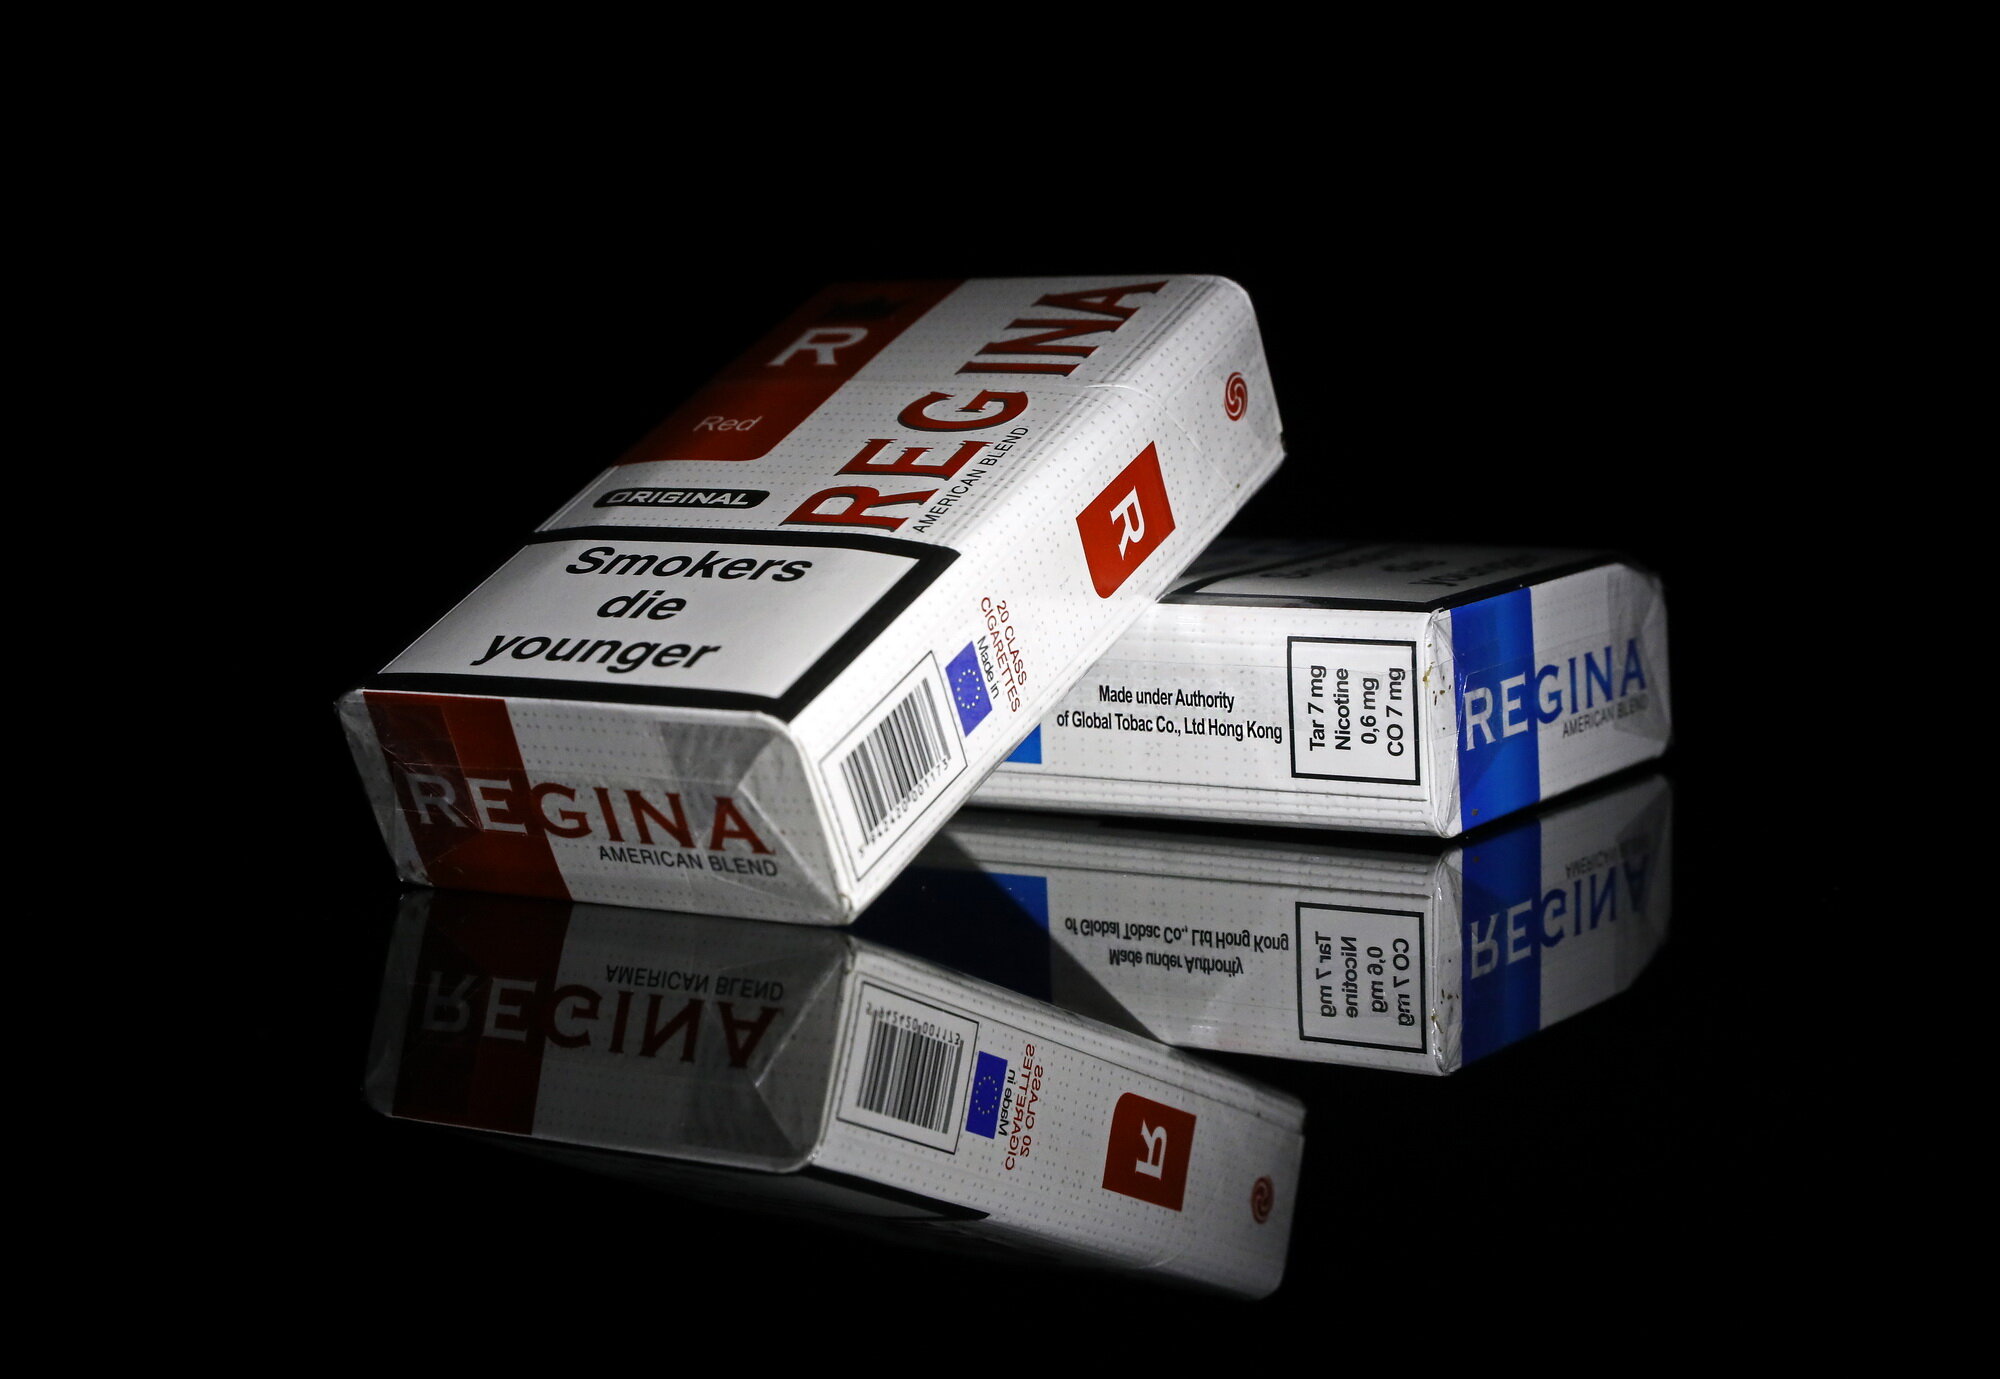 The Regina Blue and Regina Red brand cigarettes with no tax stamps on them, the warning labels in English instead of Ukrainian, and marked “For Duty Free Sale Only&#8221; in small letters on the side of the pack are sold illegally in Ukraine.